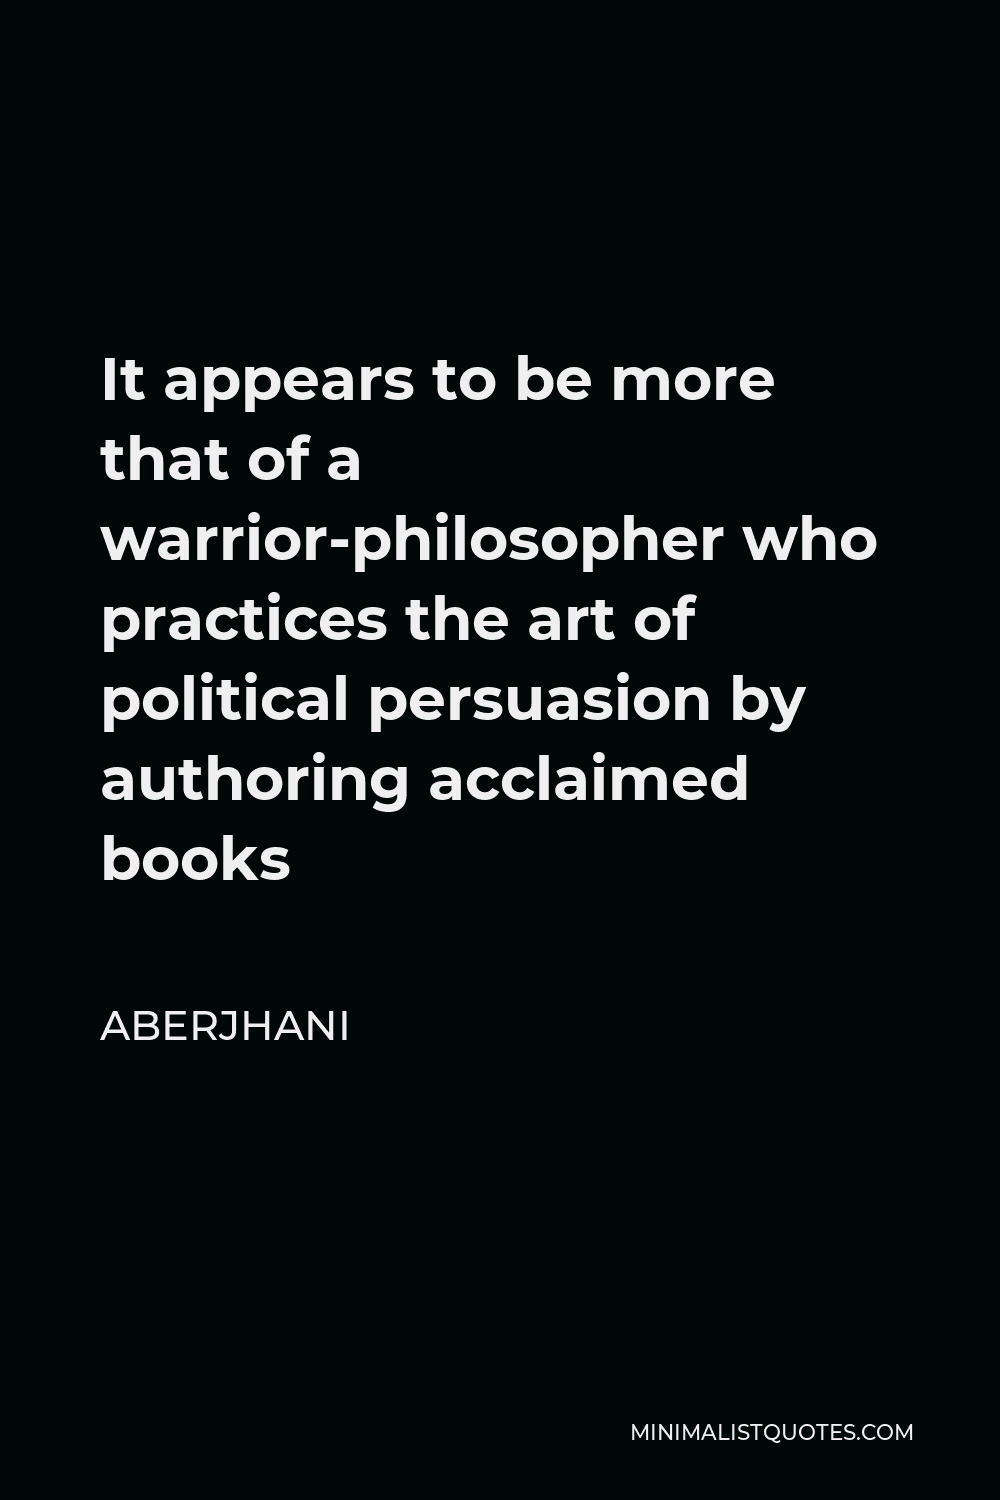 Aberjhani Quote - It appears to be more that of a warrior-philosopher who practices the art of political persuasion by authoring acclaimed books